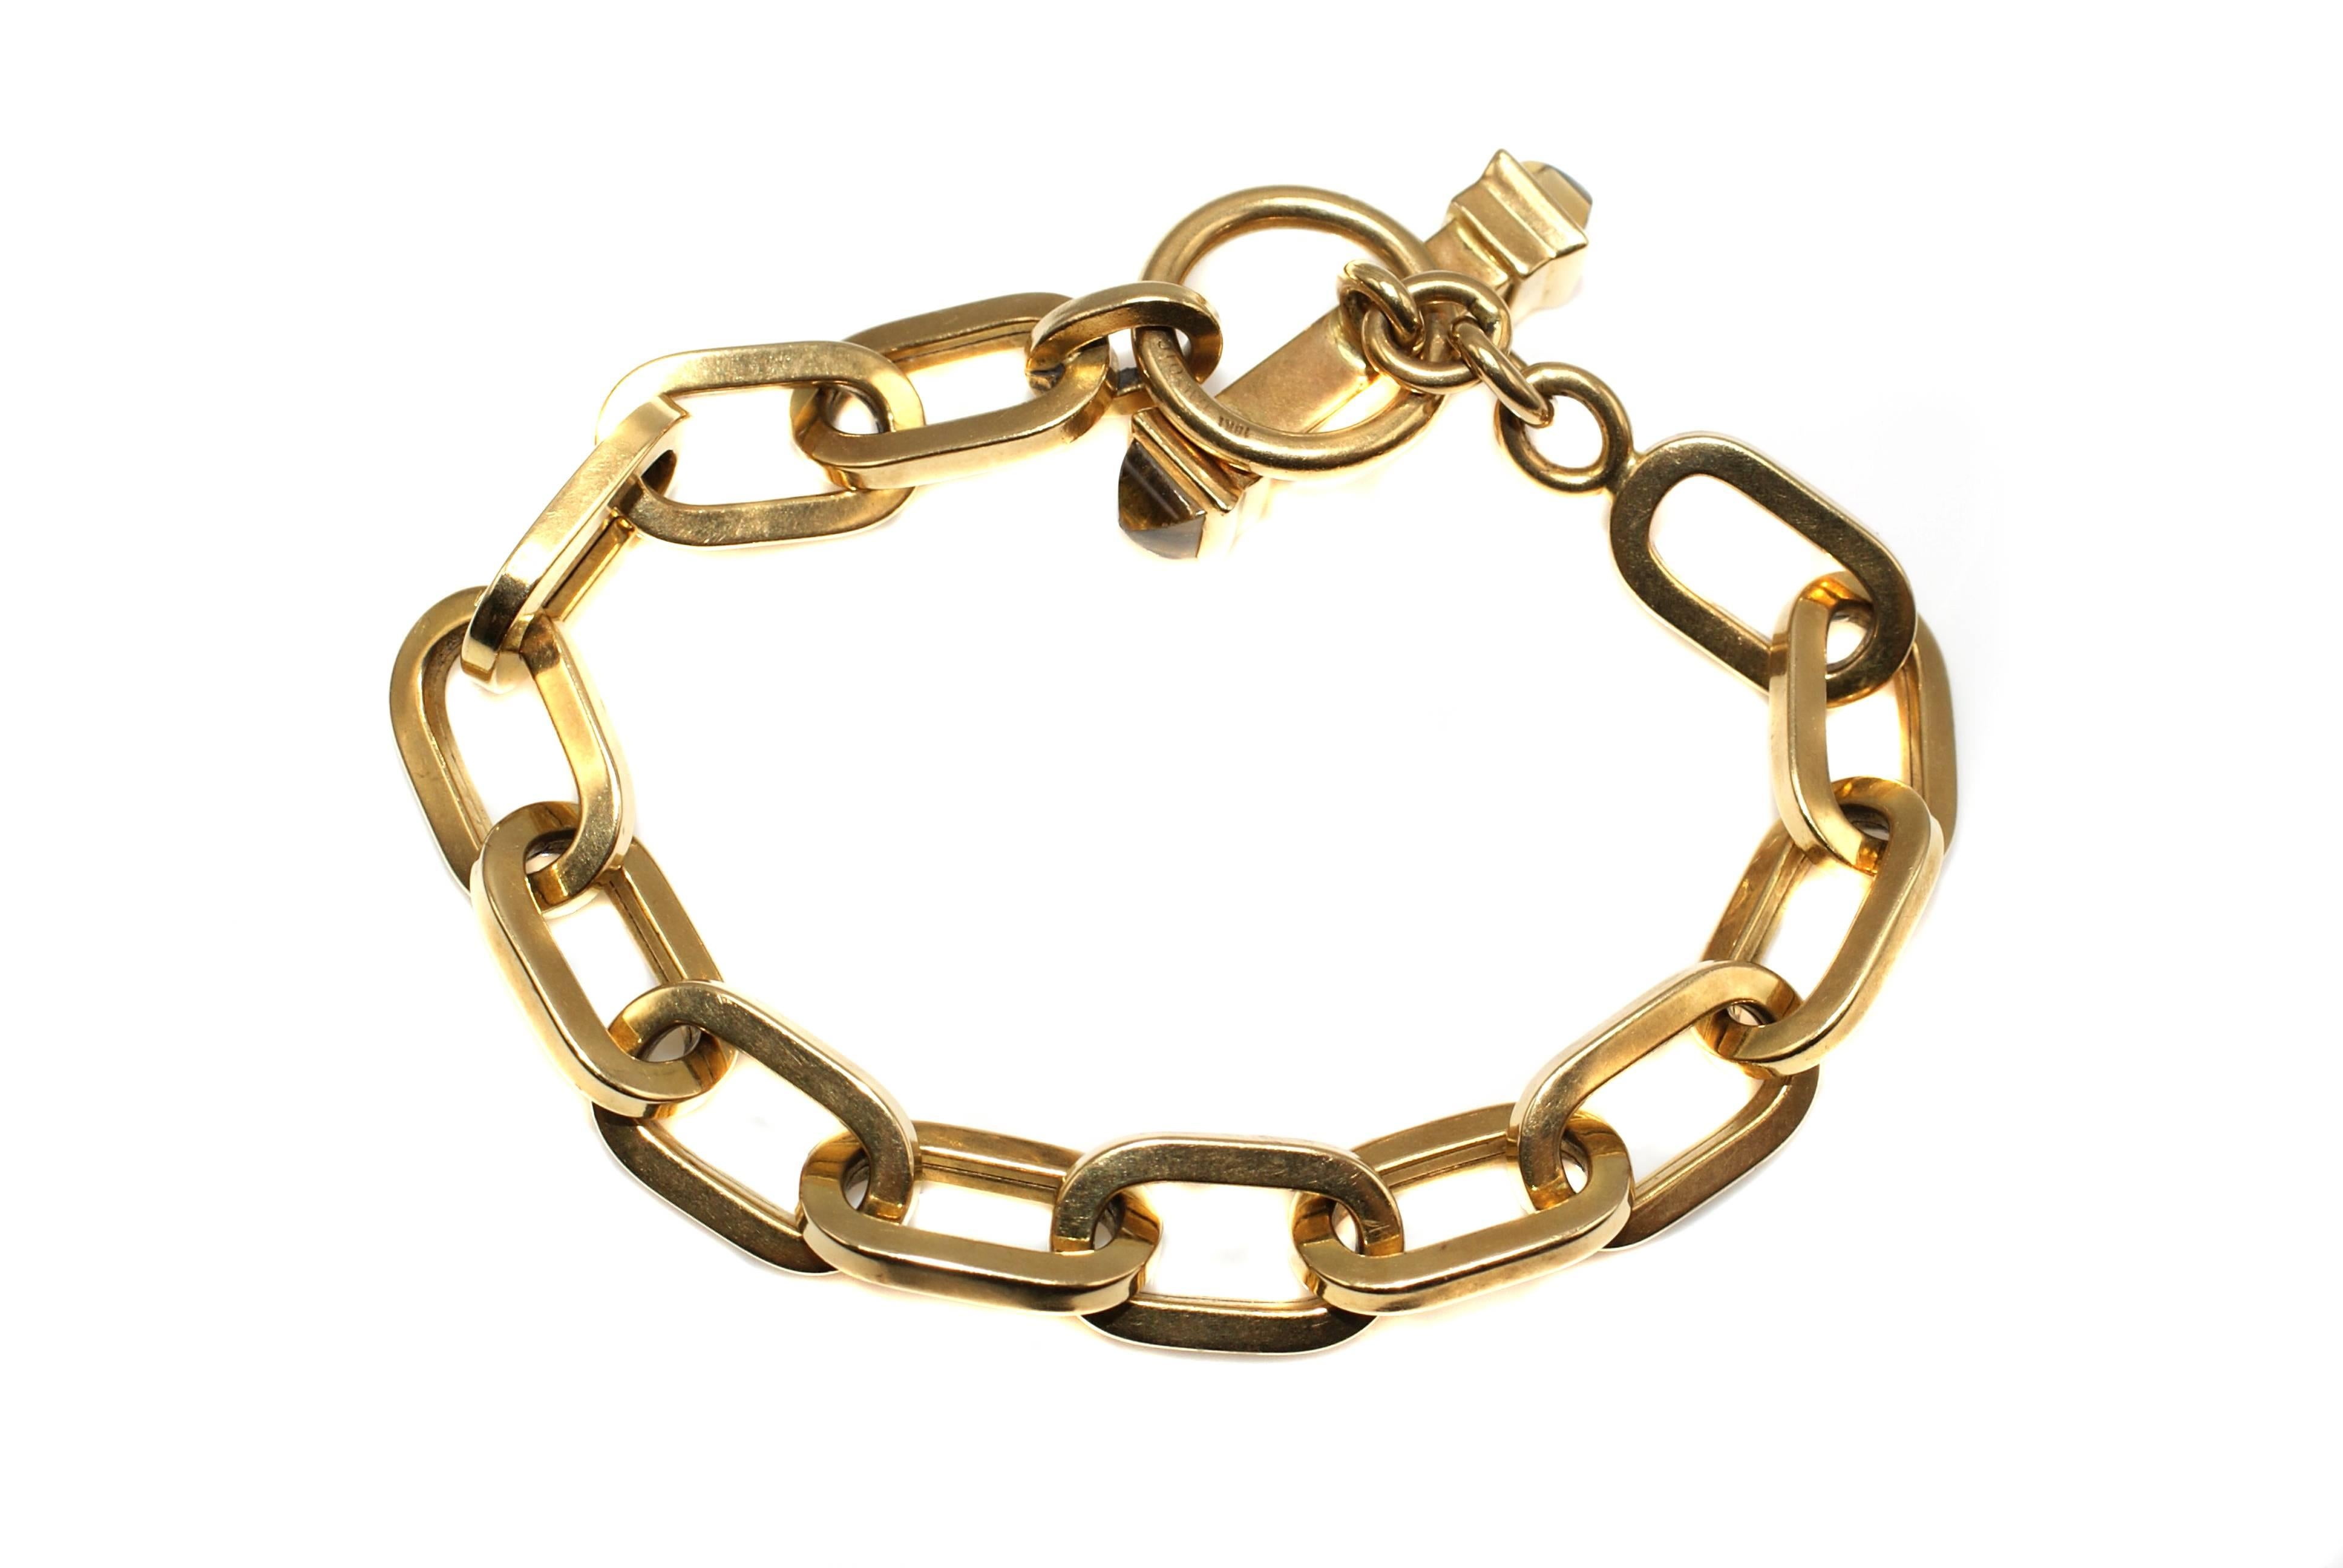 This gorgeous, beautifully hand crafted toggle bracelet is the perfect luxury accessory for all occasions. The beautifully hand crafted 18 karat yellow gold links are flexibly attached to a finely crafted toggle measuring 1.25 inches long, with a